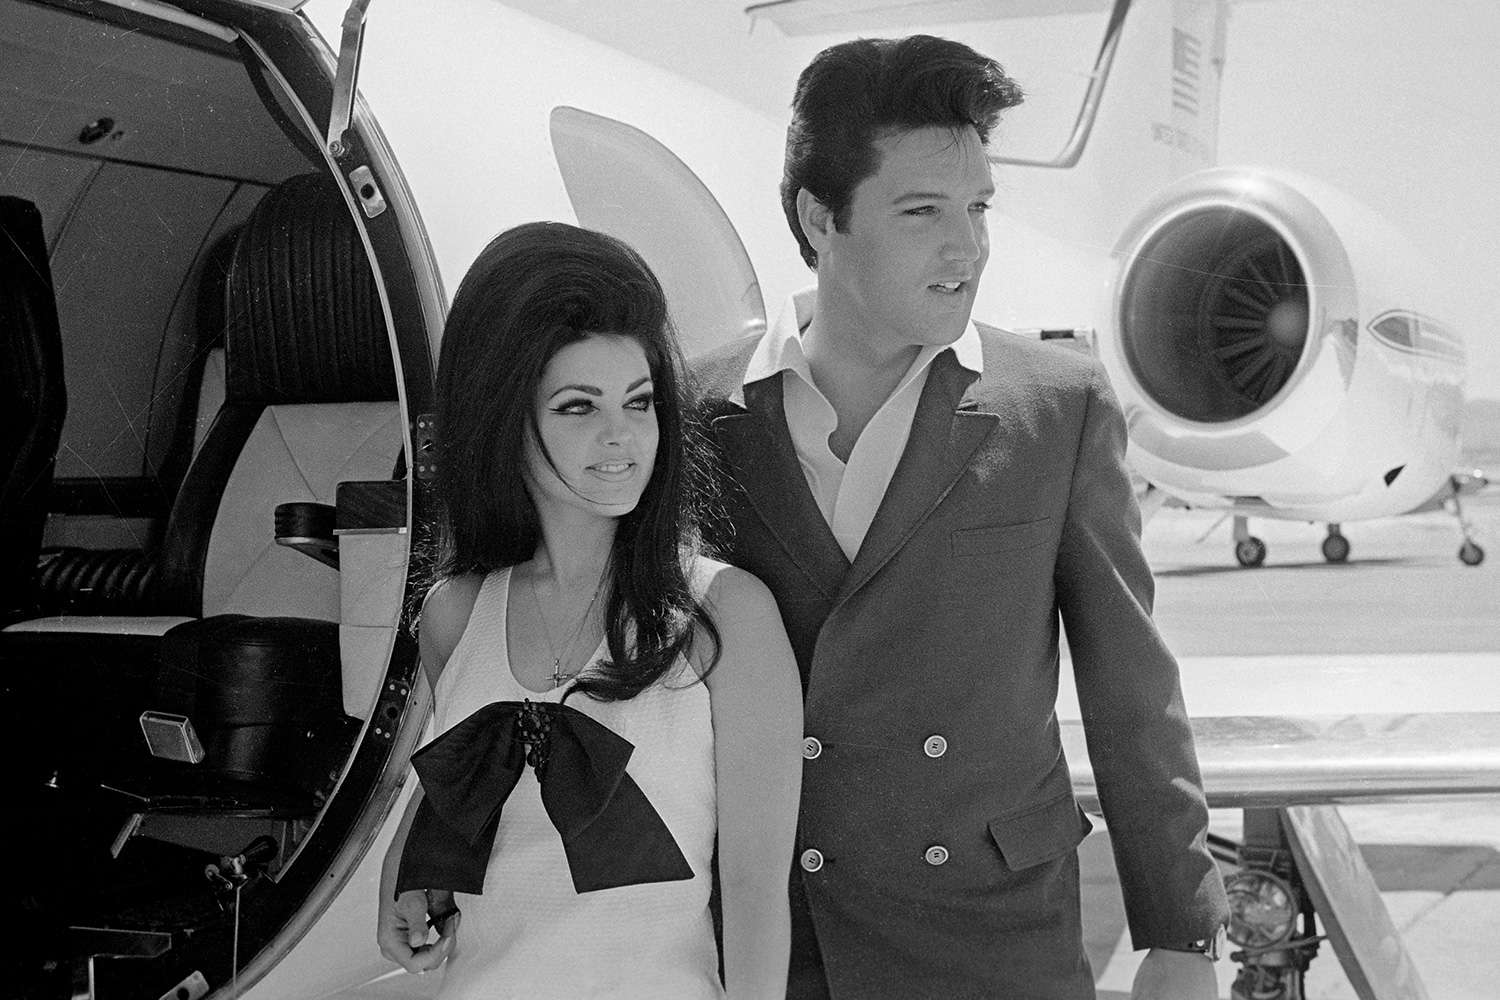 Newlyweds Elvis and Priscilla Presley, who met while Elvis was in the Army, prepare to board their private jet following their wedding at the Aladdin Resort and Casino in Las Vegas